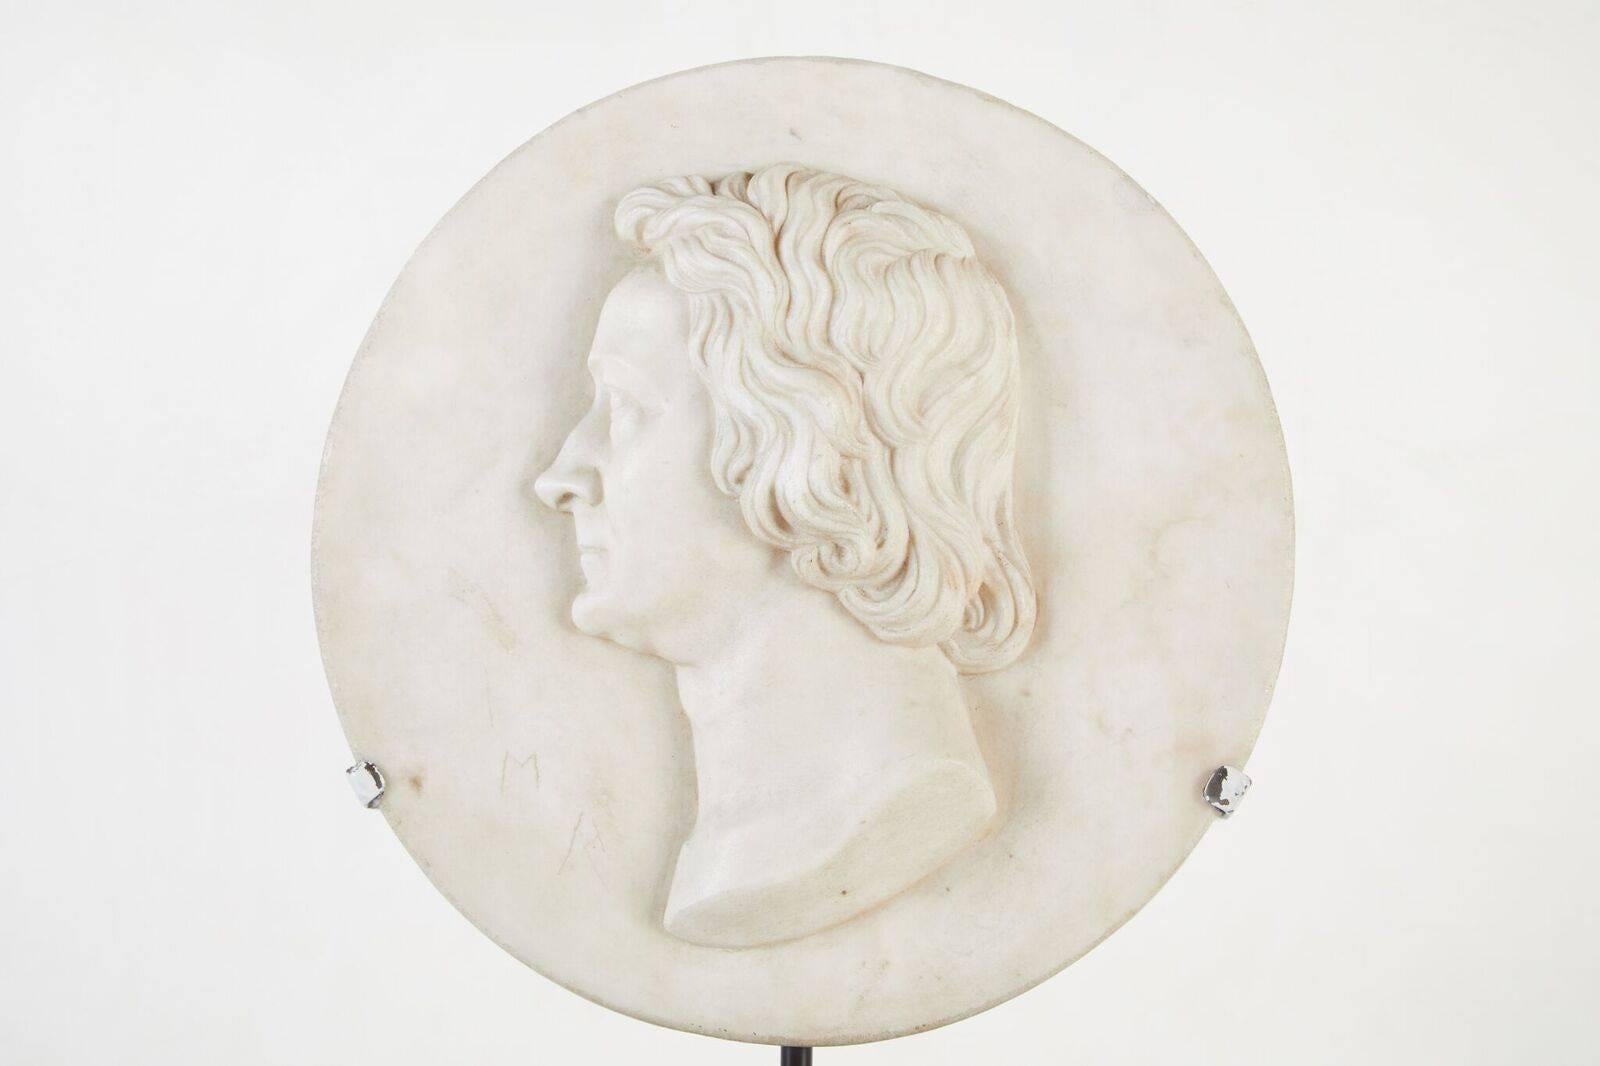 Hand-carved, white marble, relief medallion of famous Danish sculptor, Betel Thorvaldsen (1770-1844) who has an entire museum dedicated to his work in Copenhagen.